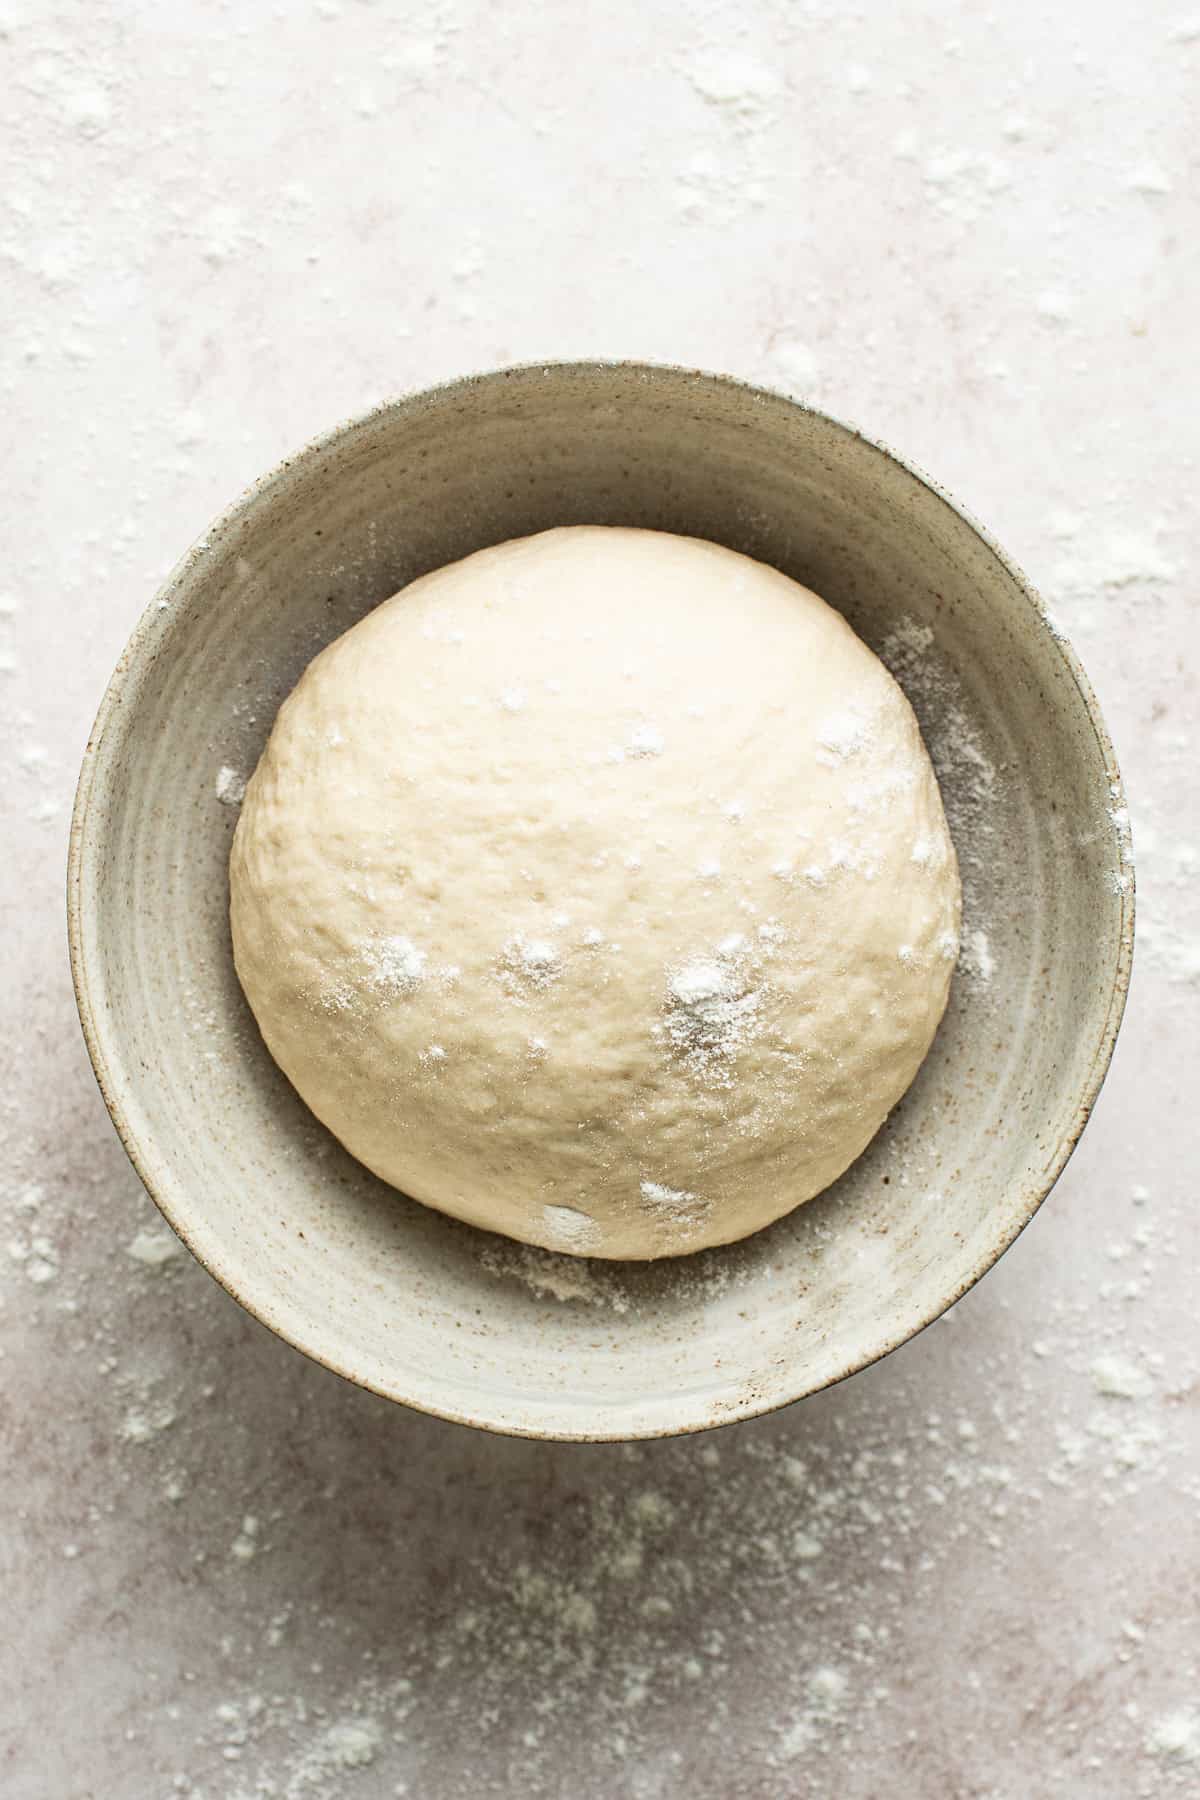 Sopapilla dough inside a large bowl ready to rest